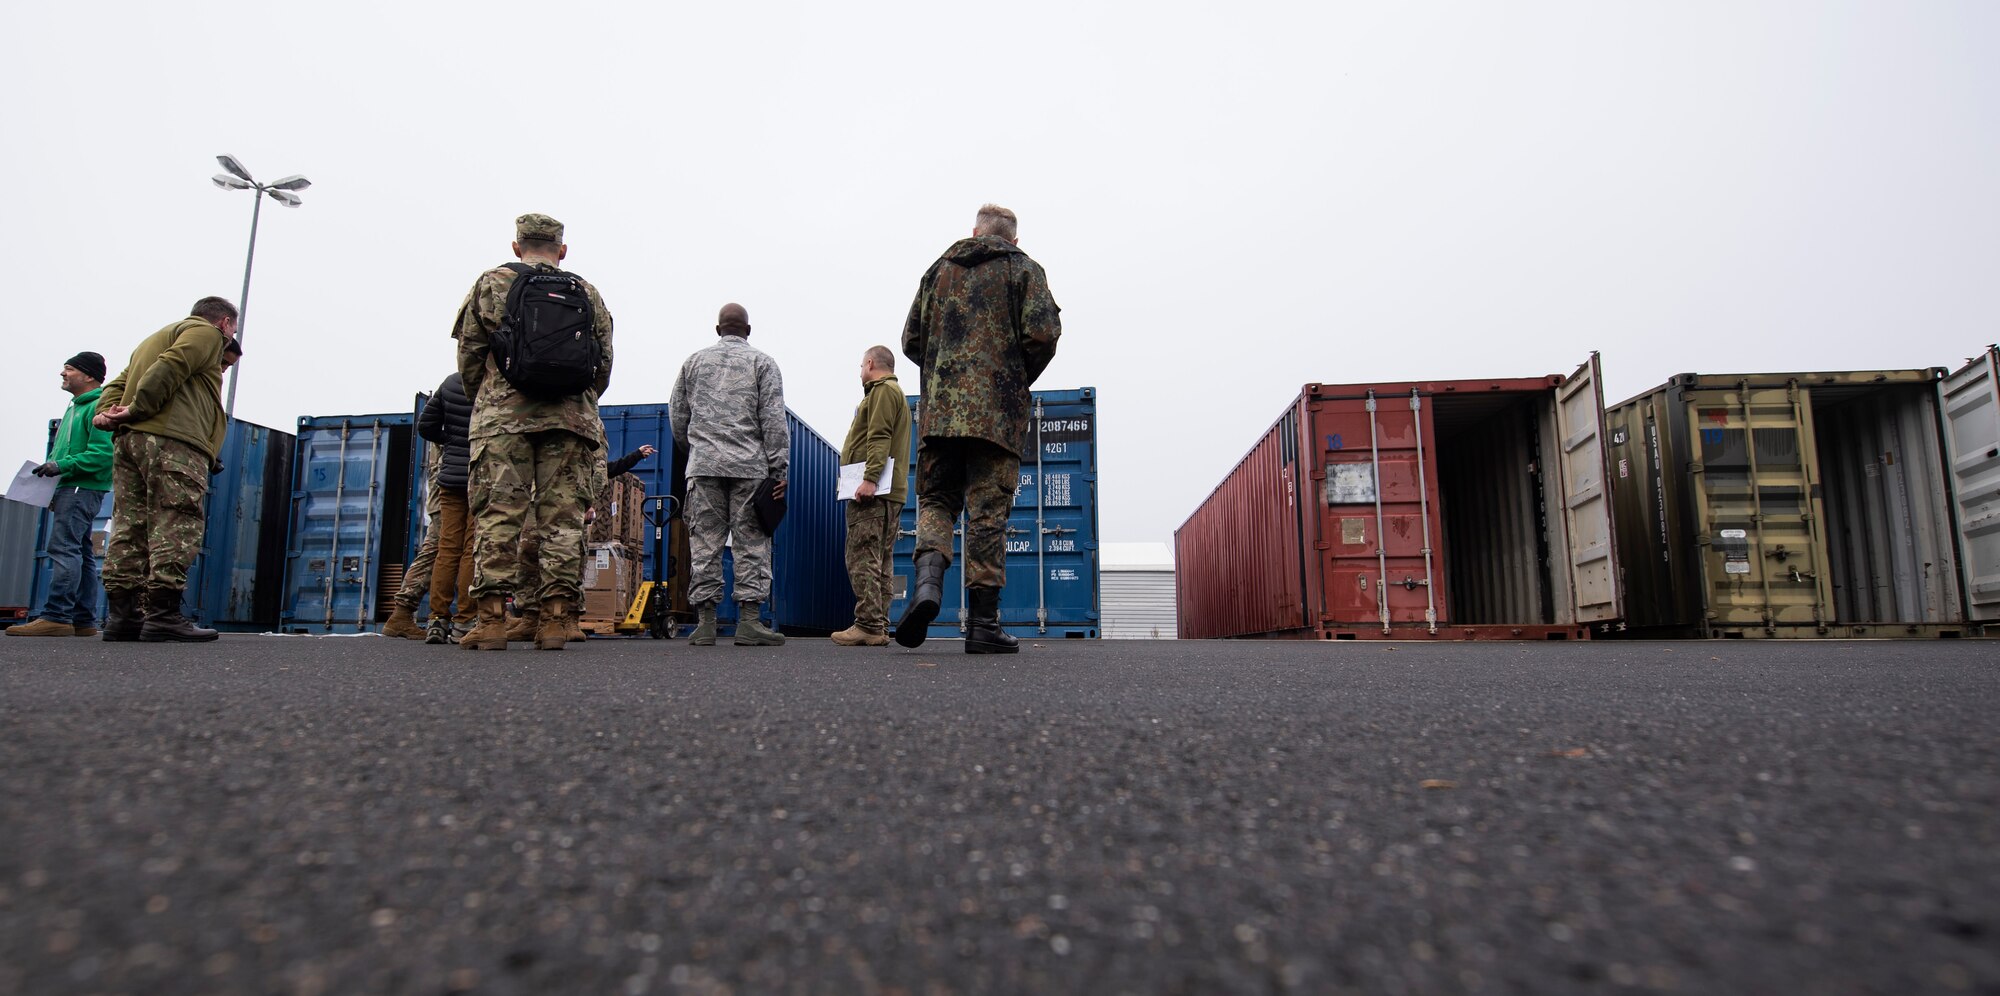 U.S. Air Force Airmen from the 52nd Fighter Wing escort Romanian inspection team members and members of the Defense Threat Reduction Agency during a Conventional Armed Forces in Europe Treaty exercise at Spangdahlem Air Base, Germany, Oct. 24, 2019. The exercise took place to verify readiness of the 52nd FW in the event of a short-notice CFE inspection. Inspectors must be granted access to any facility on the installation with an entryway measuring two meters or more in width, to include containers that measure two meters or more along all dimensions. (U.S. Air Force photo by Airman 1st Class Valerie Seelye)